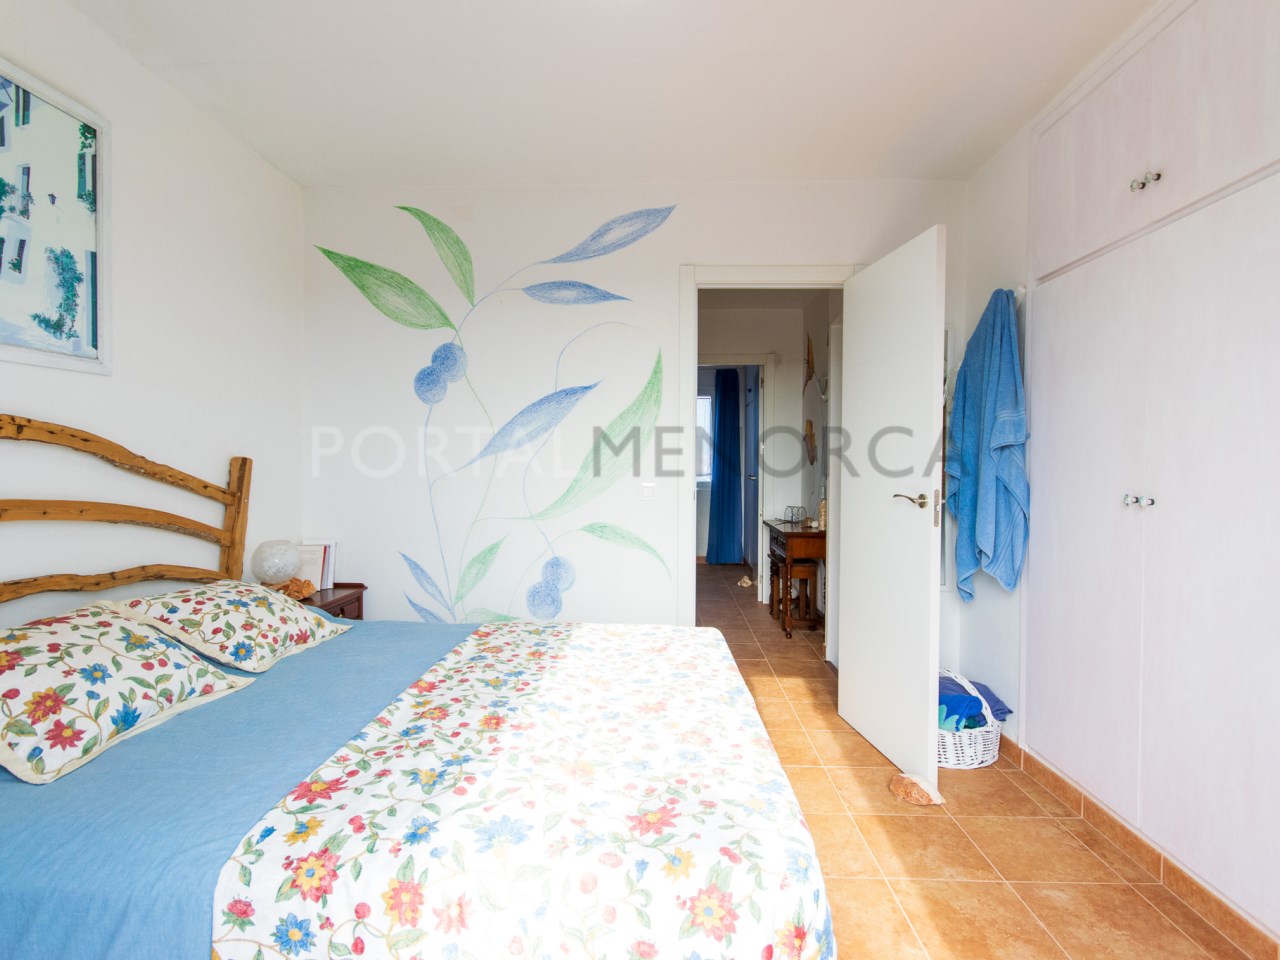 Master bedroom of two bedroom townhouse for sale in Cales Coves